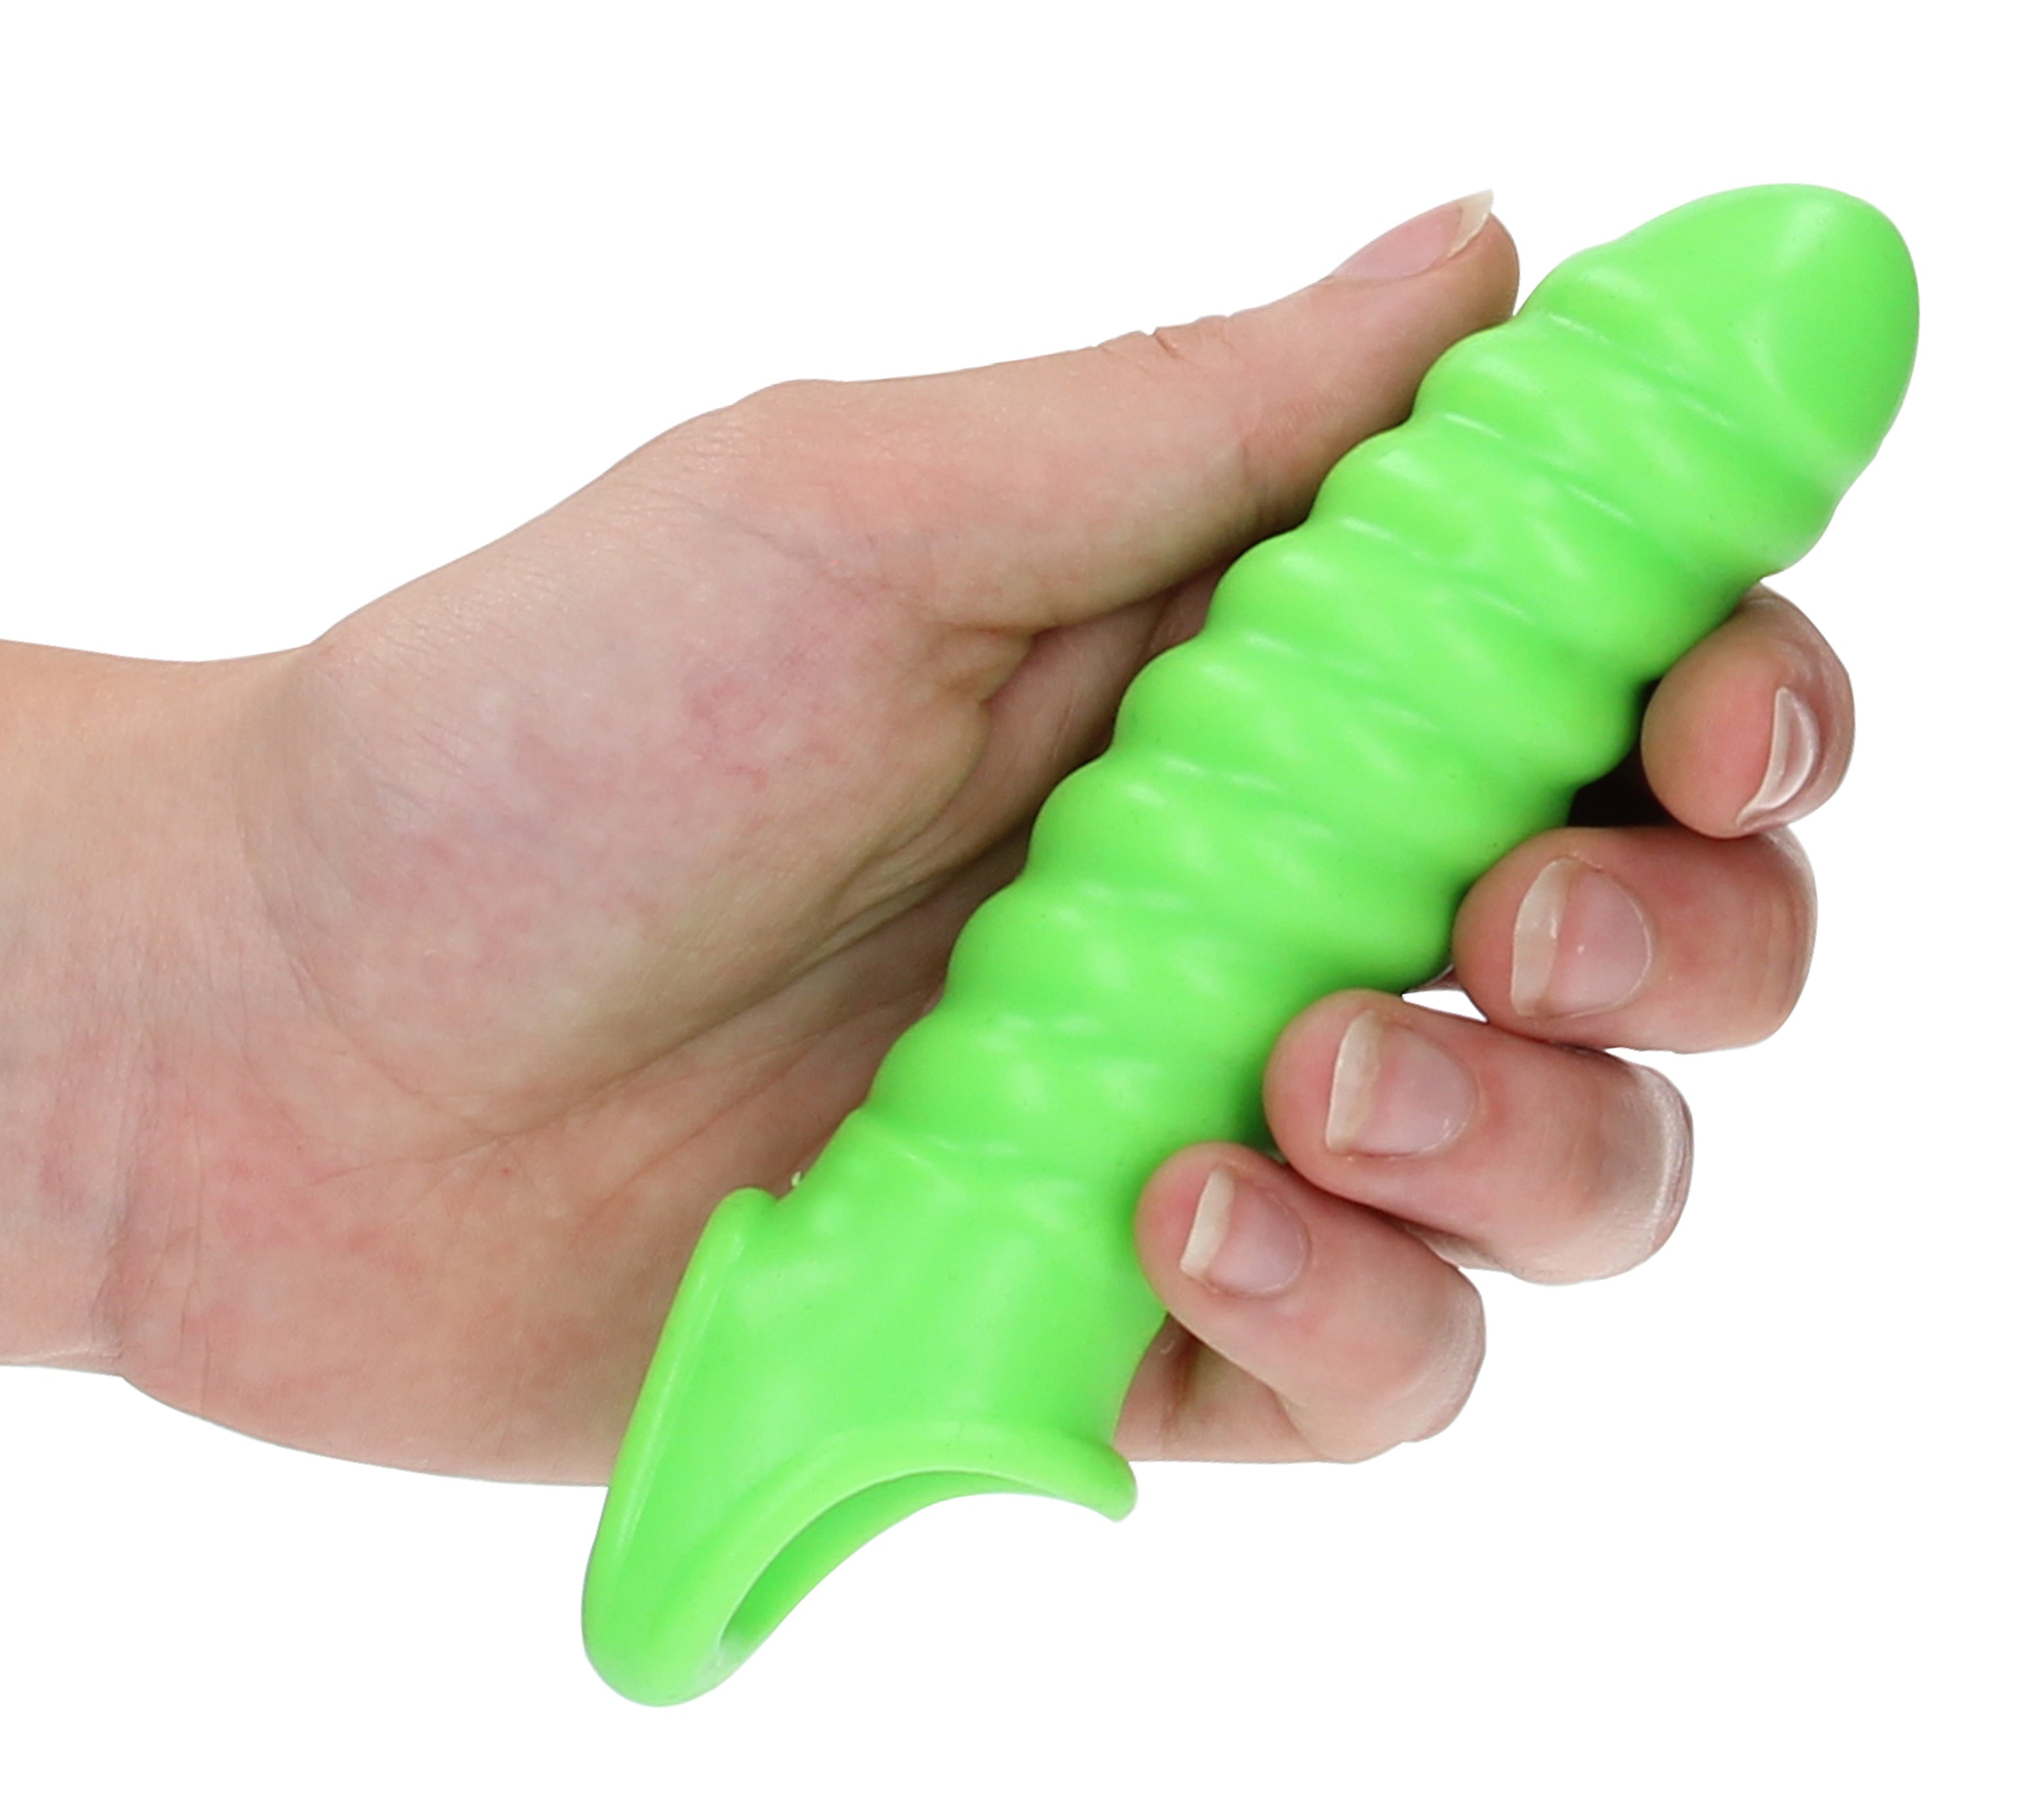 Ouch! Glow in the Dark Swirl Stretchy Penis Sleeve - Illuminate Your Pleasure